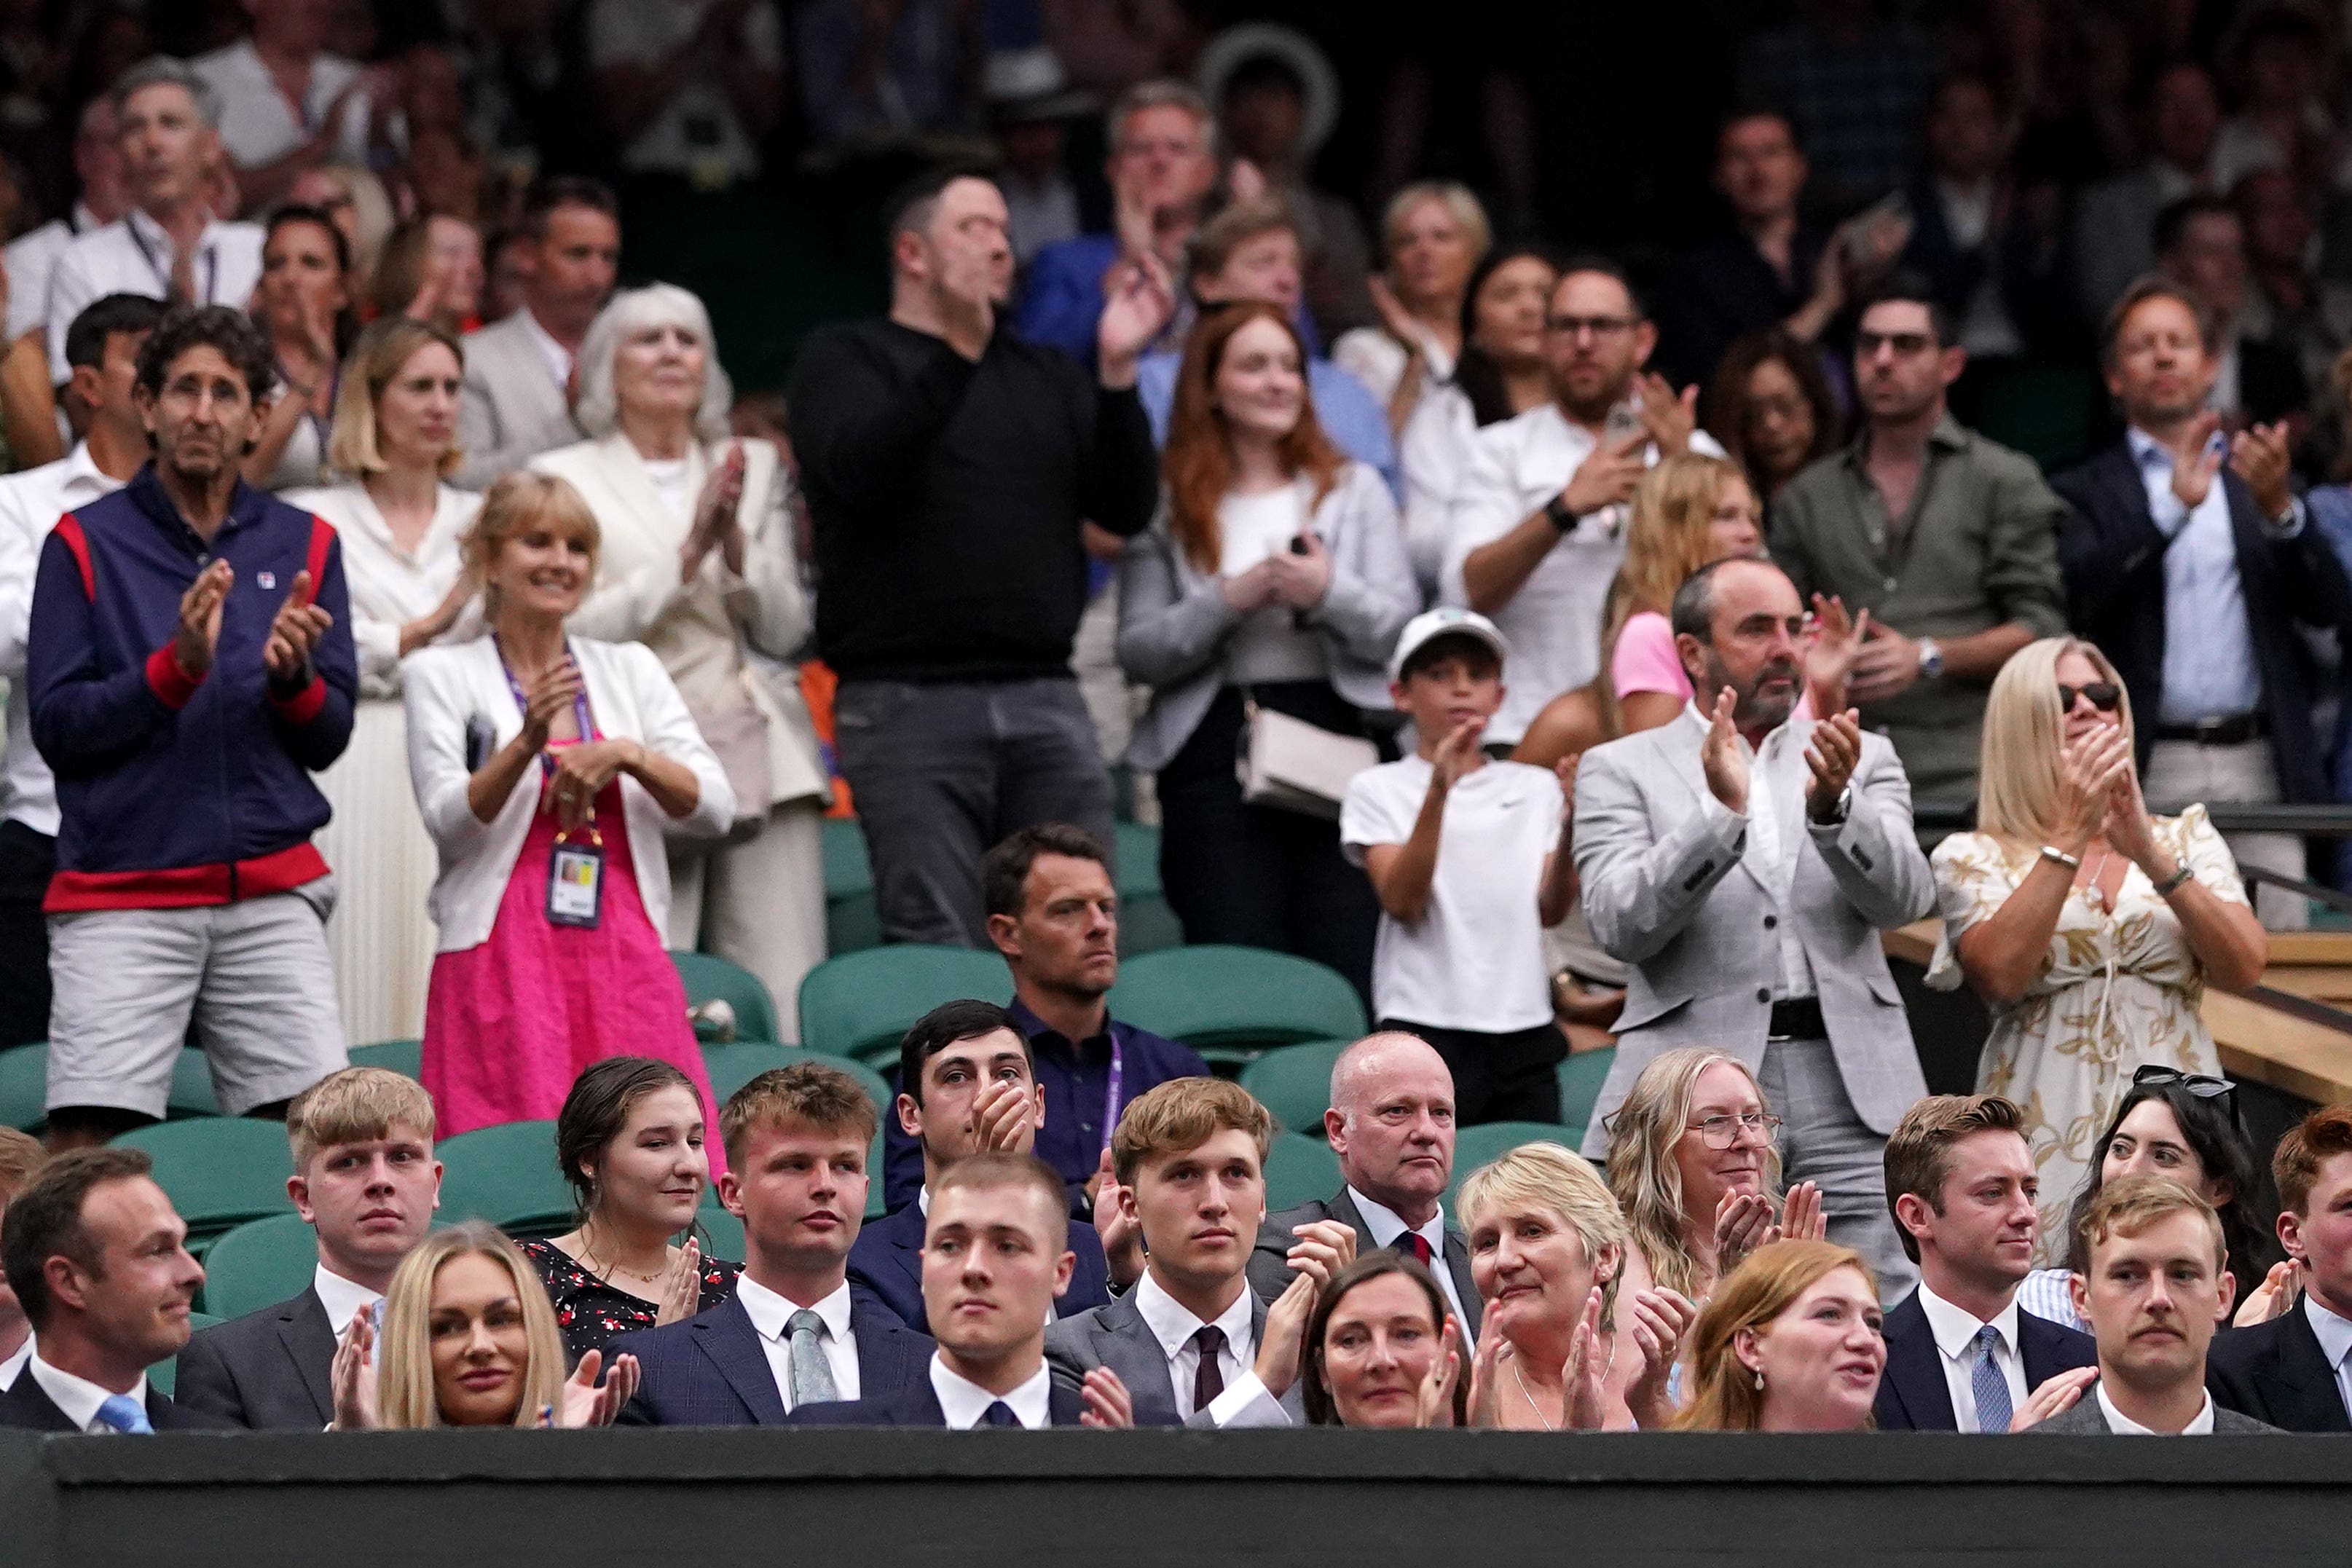 Military personnel including Members of 1st Battalion, Grenadier Guards, who were pallbearers at the funeral in 2022 of Queen Elizabeth II, take seats at Centre Court (Adam Davy/PA)